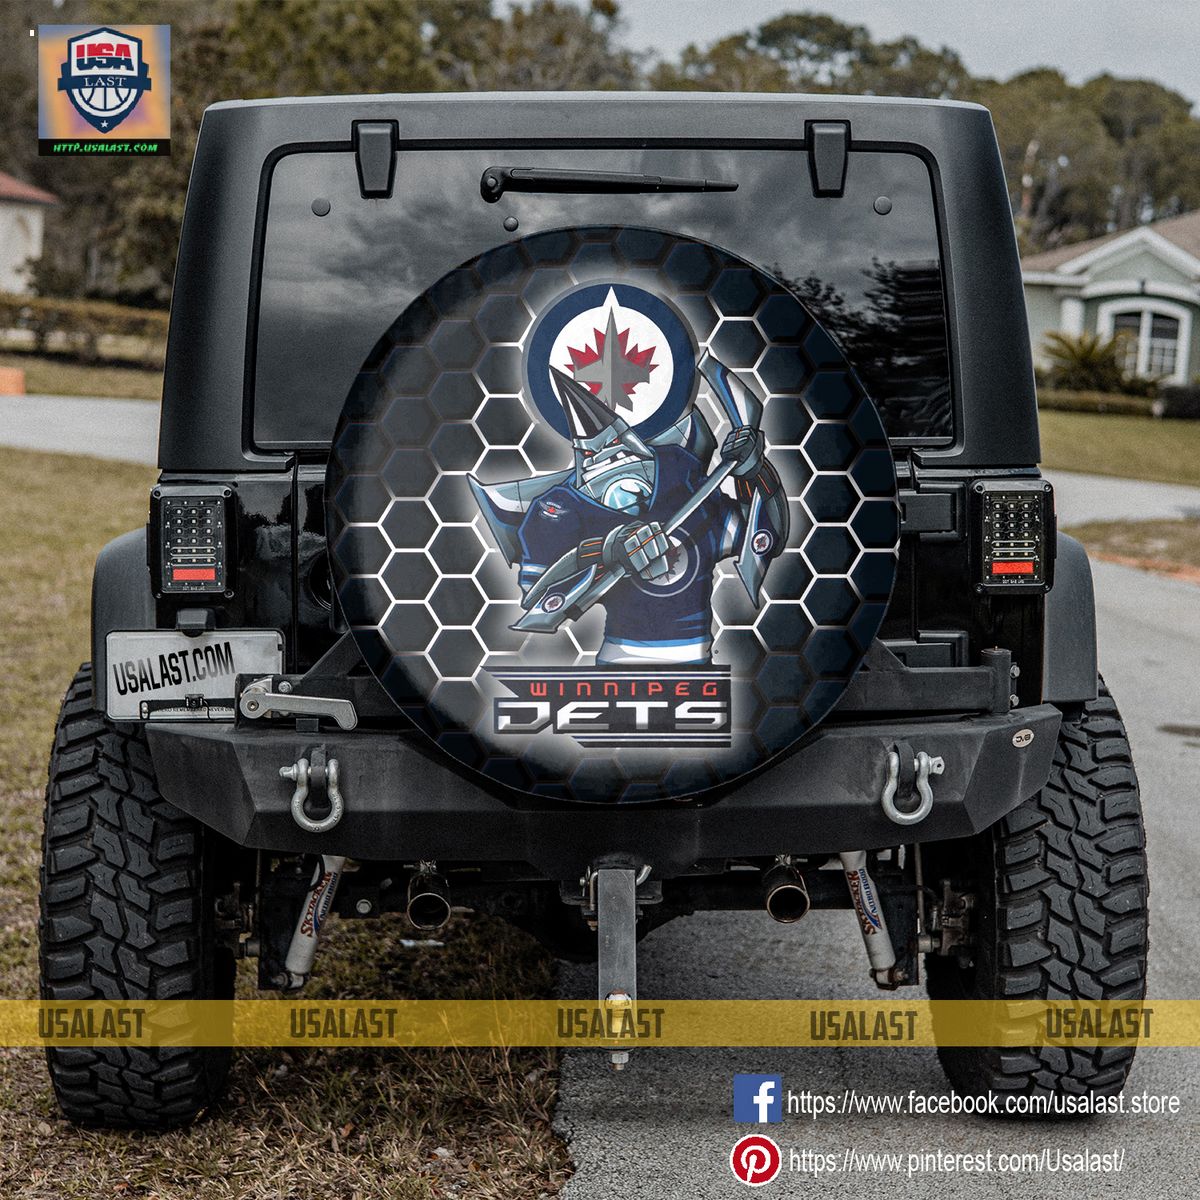 Winnipeg Jets MLB Mascot Spare Tire Cover - You look cheerful dear